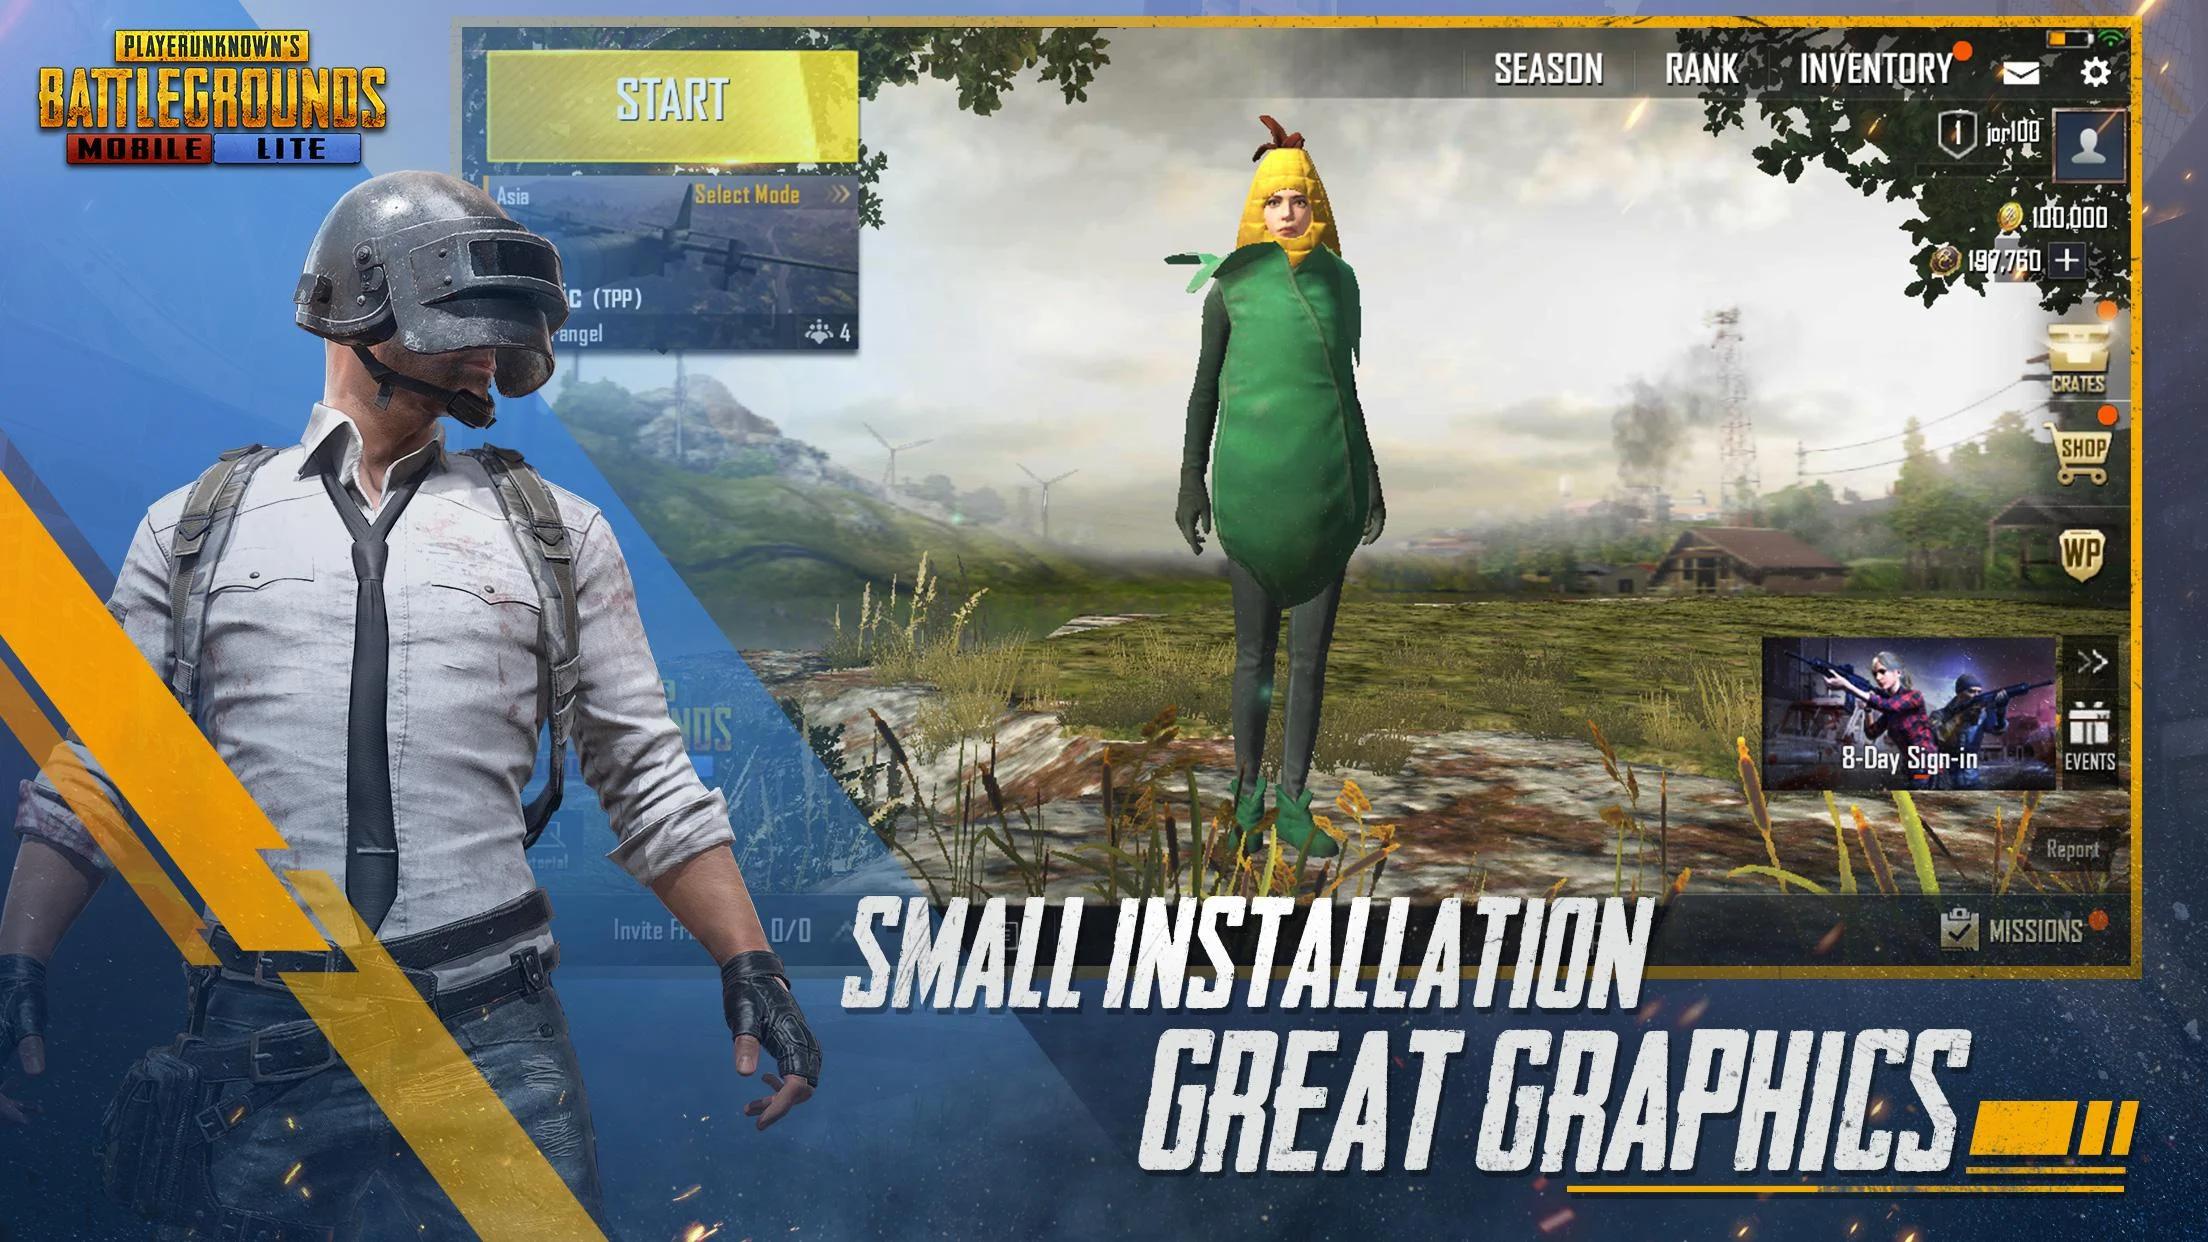 PUBG Mobile Lite Version Now Available In India